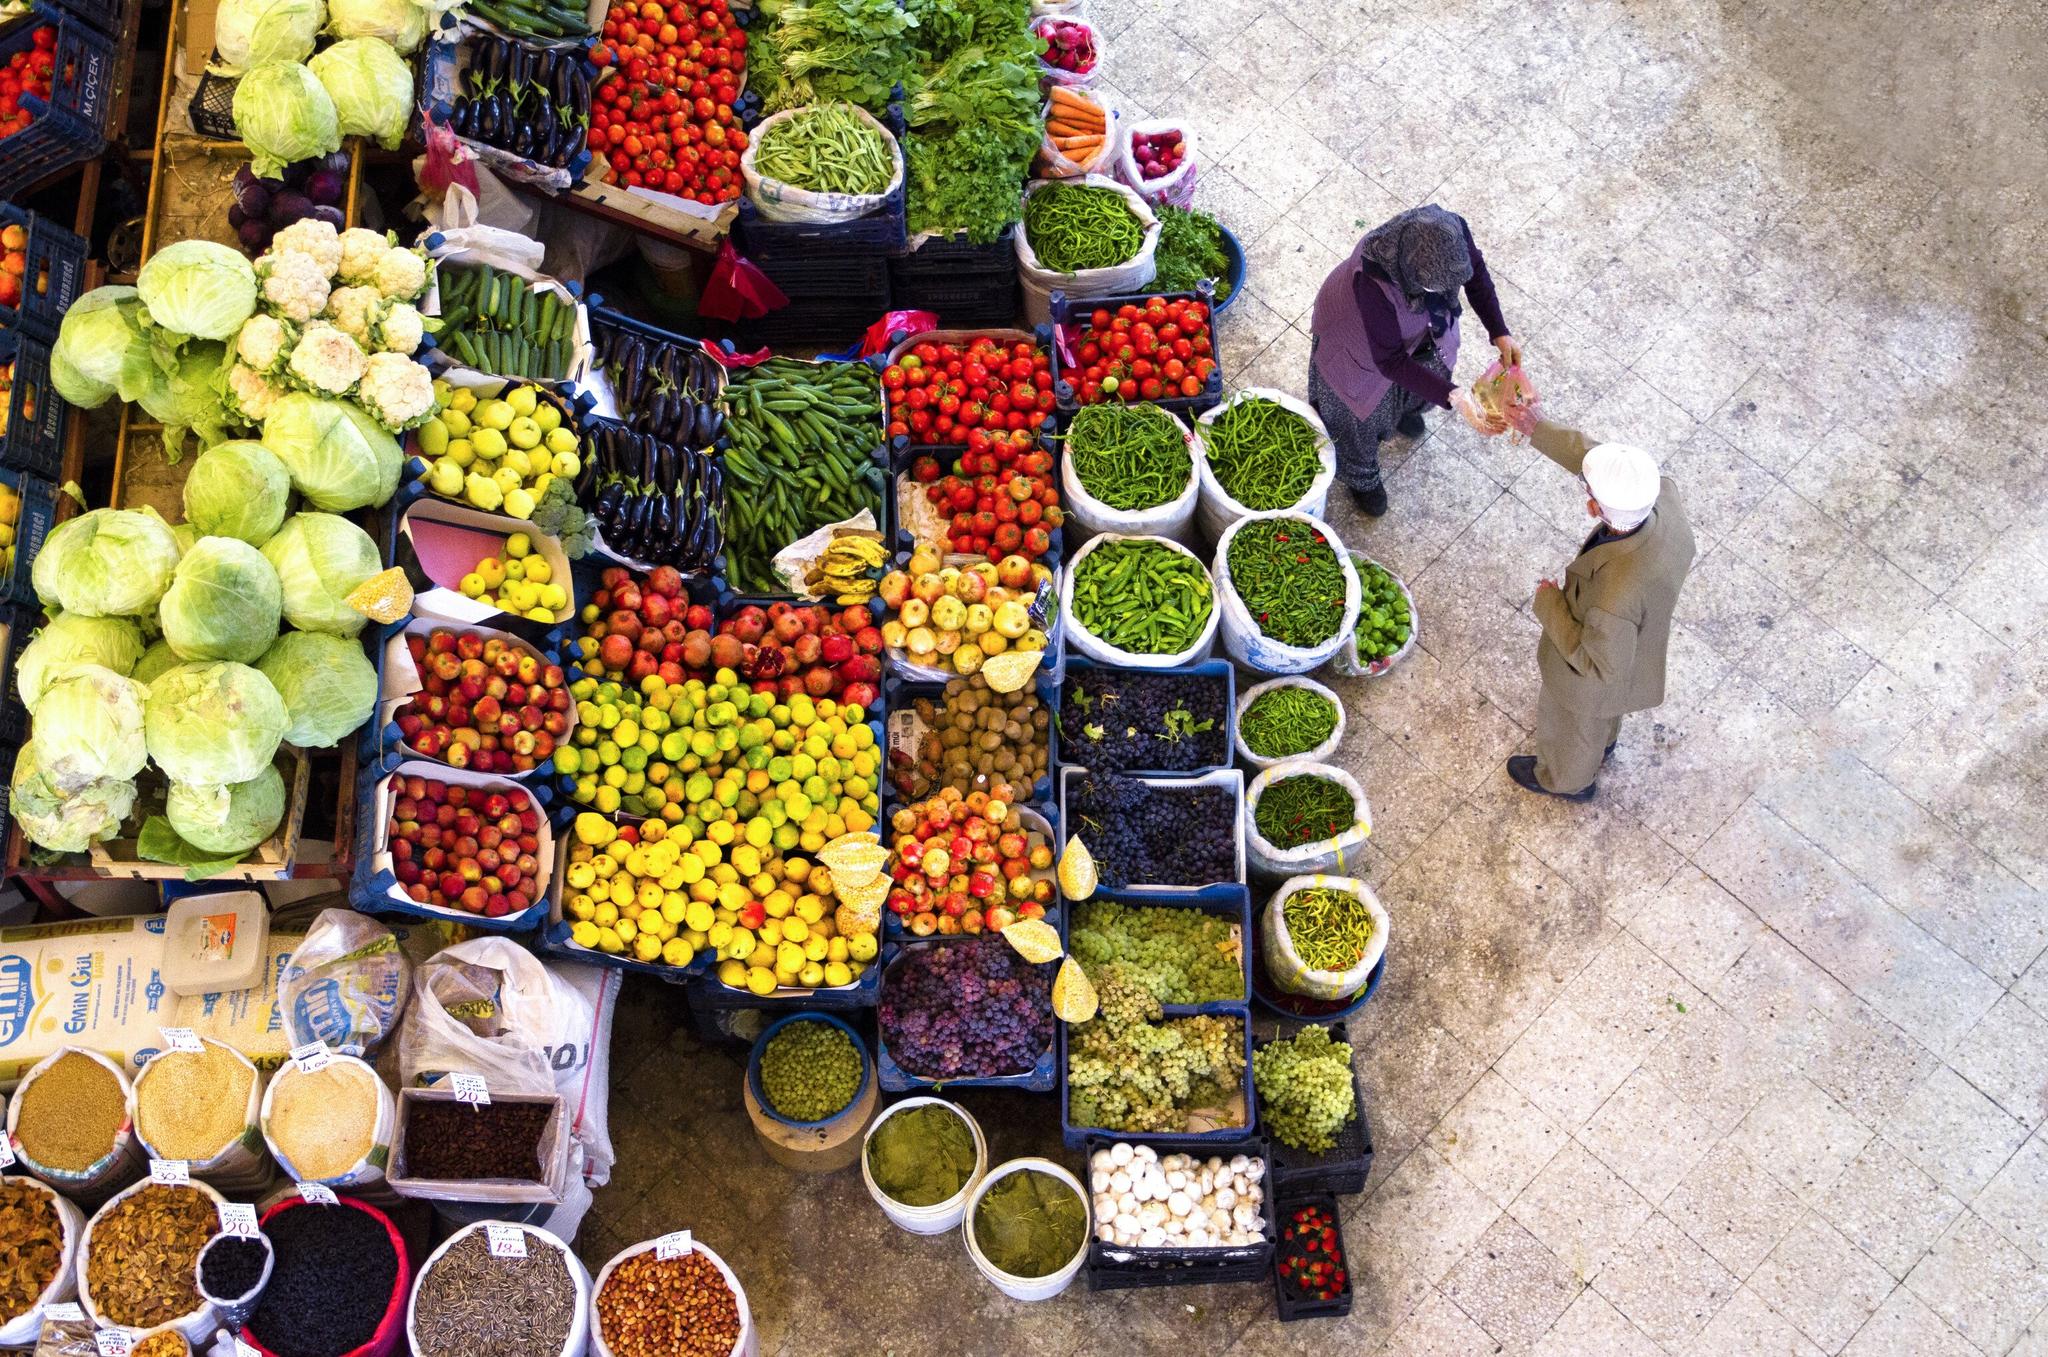 Top view of a woman and man next to colourful vegetables and fruits stands.